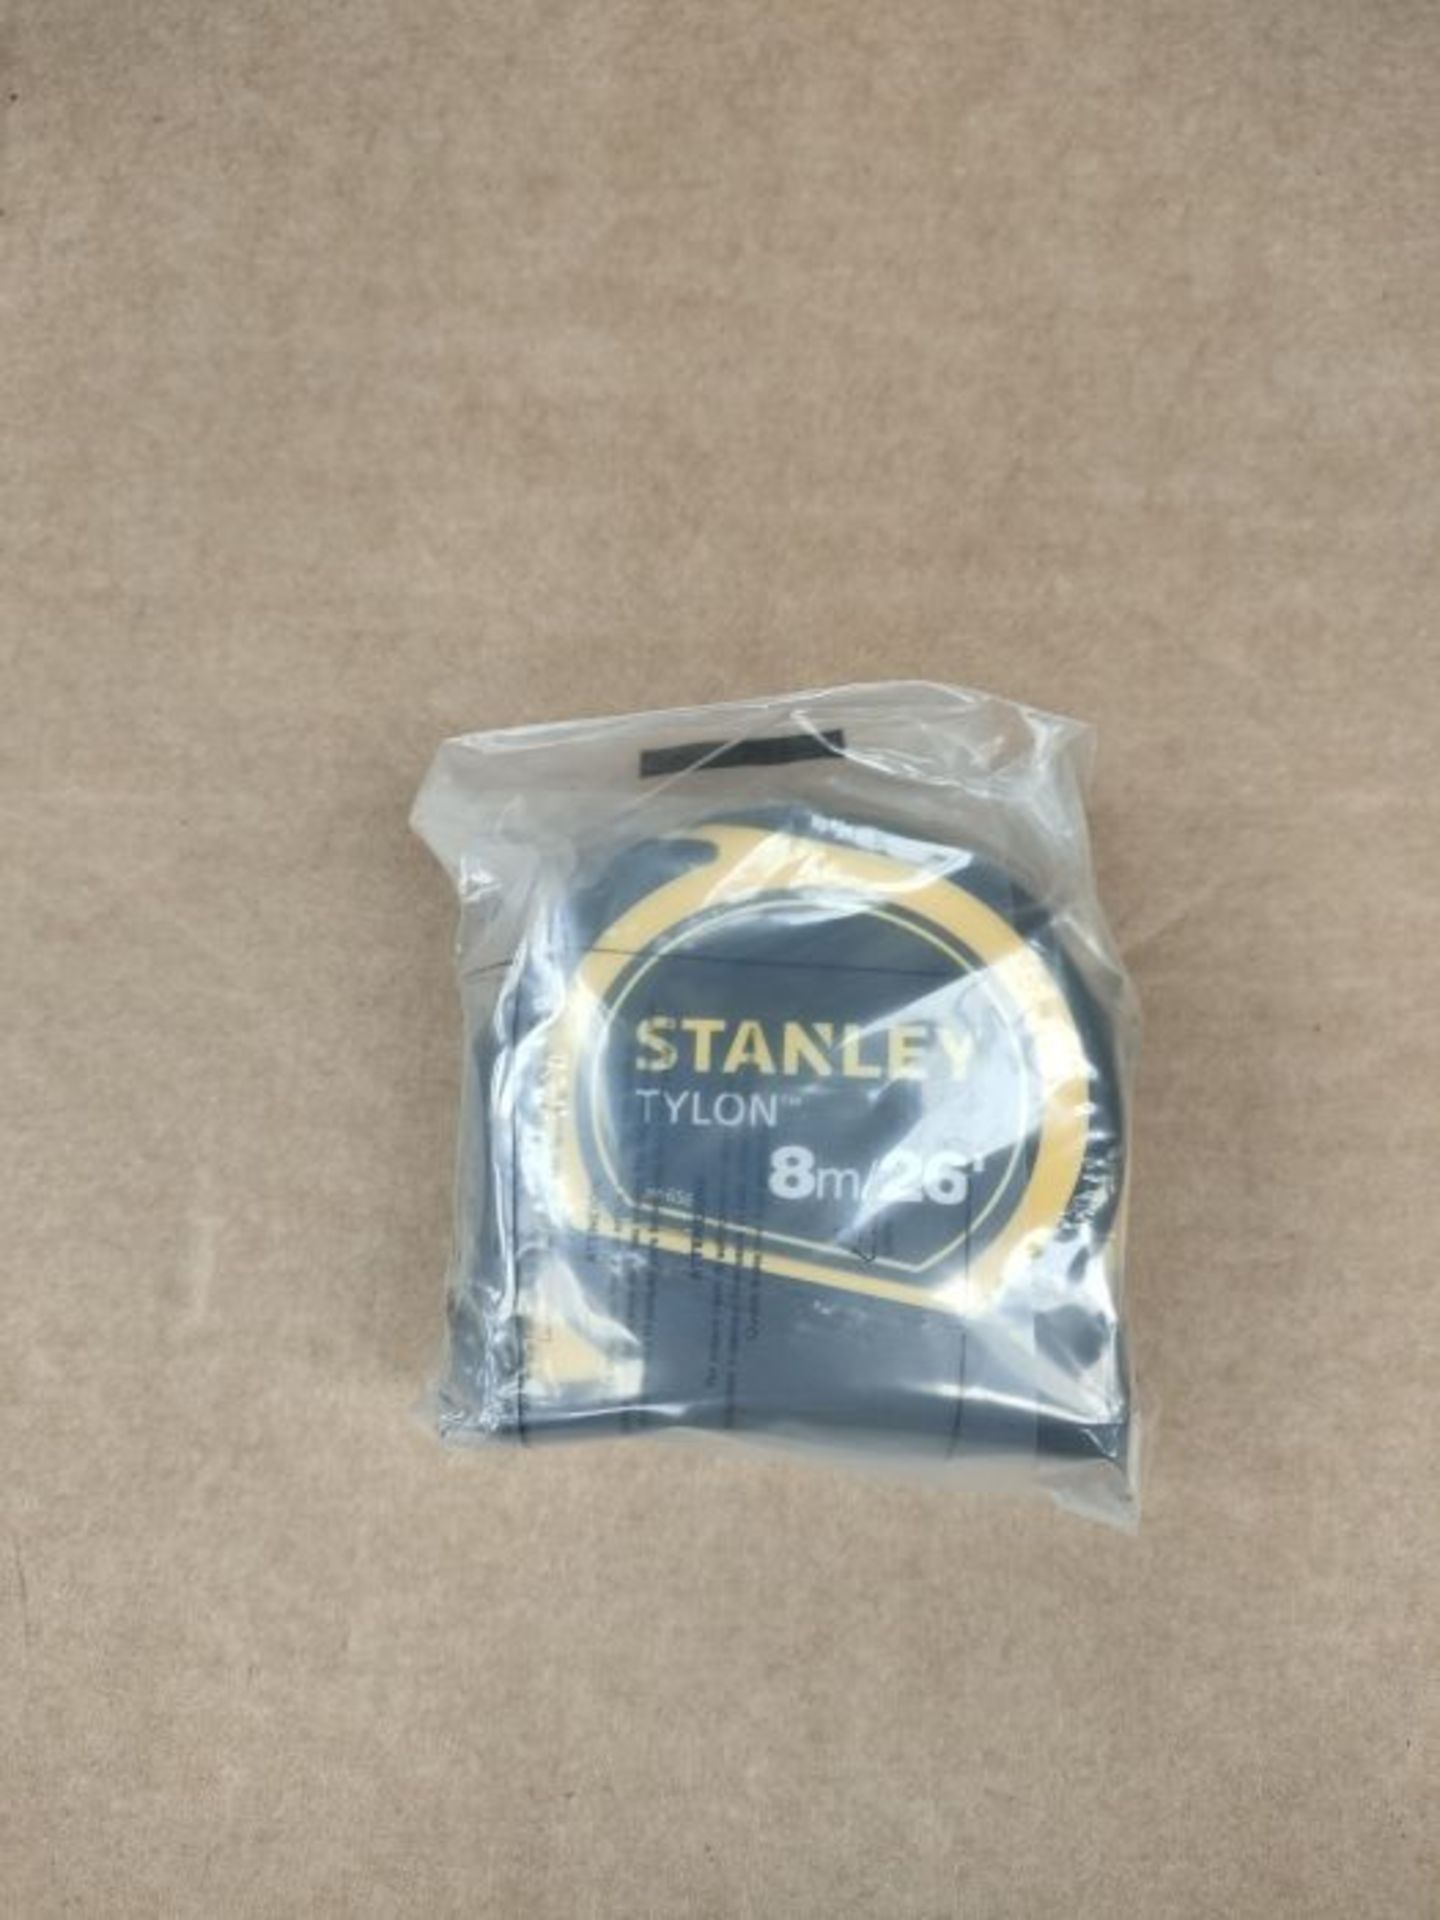 Stanley 1-30-656 Metric/Imperial Tape Measure with 25mm Blade, 8m/26' - Image 2 of 2